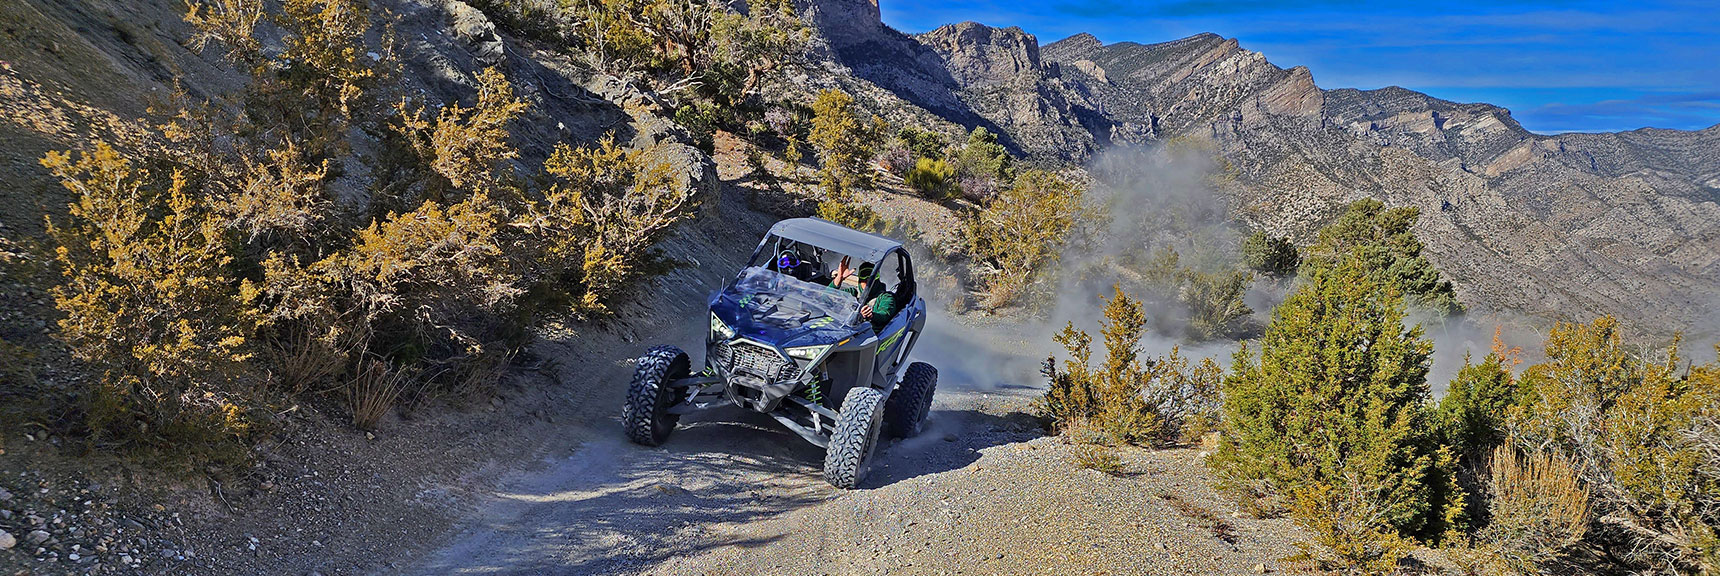 This is the Kind of Vehicle Made for Rocky Gap Road | North Upper Crest Ridgeline | Rainbow Mountain Wilderness, Nevada